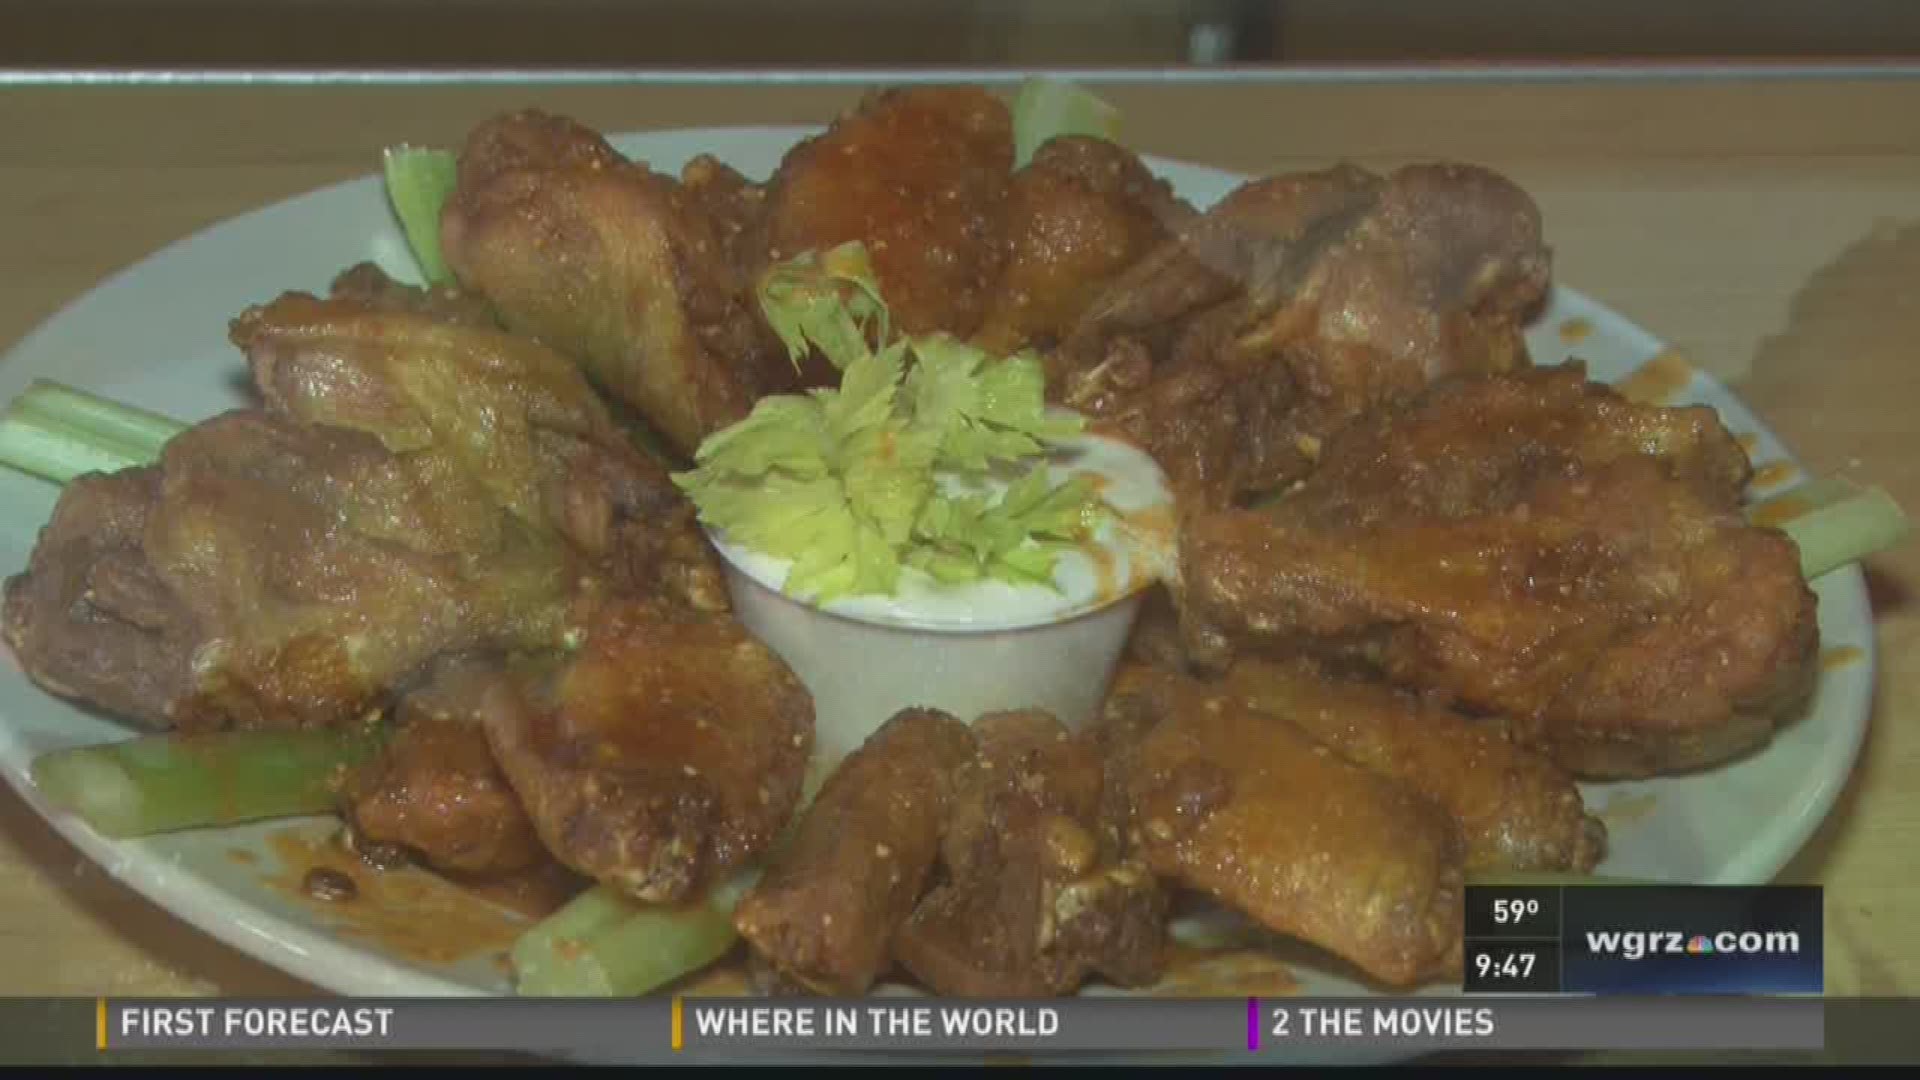 Zachary Kineke takes us to a hidden gem in South Buffalo where you can get wings a number of ways.